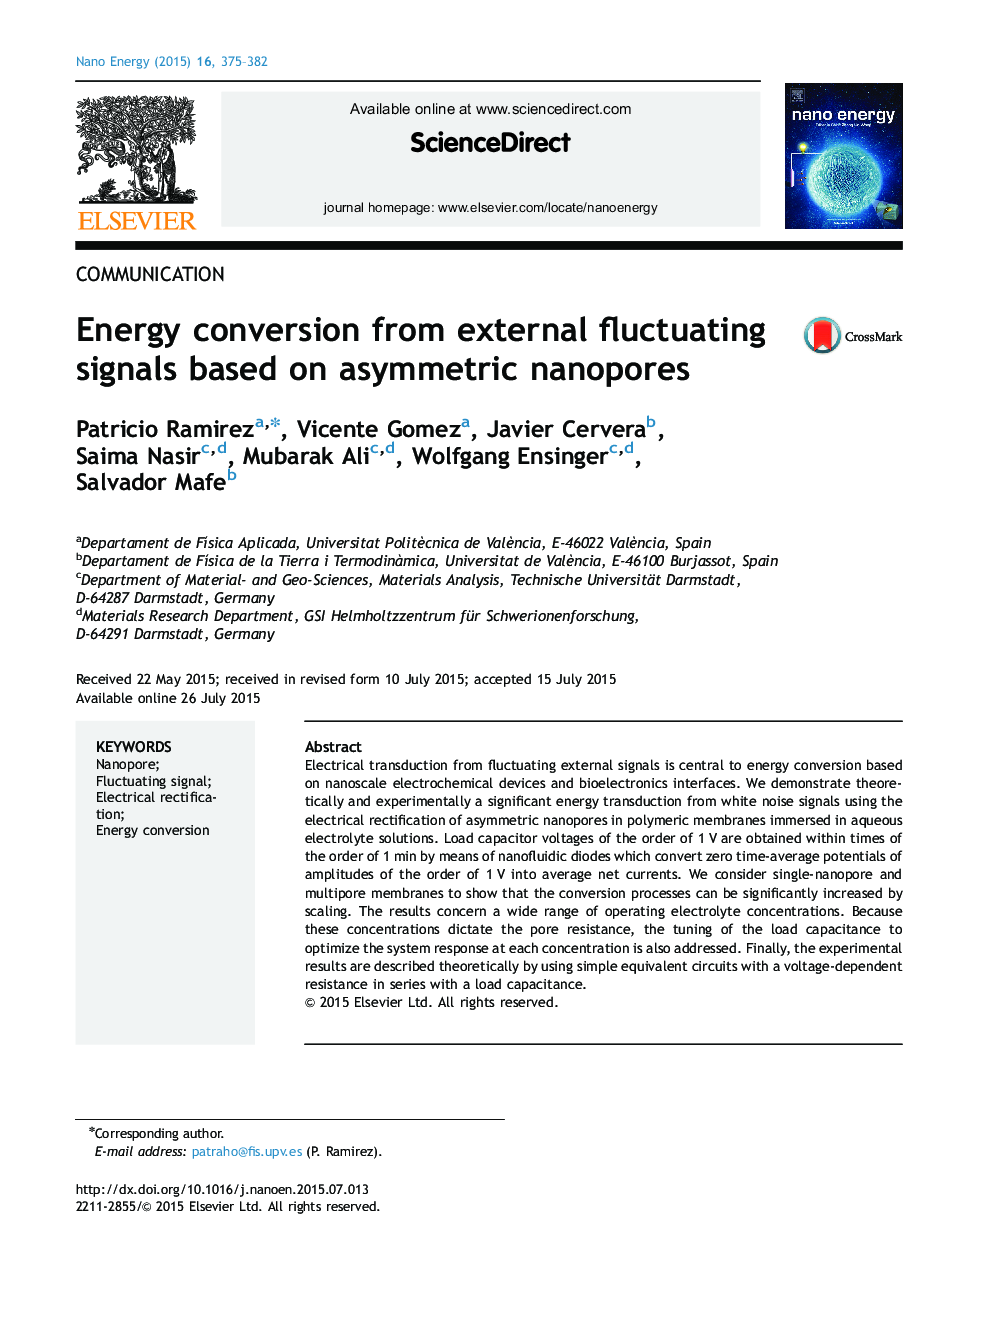 Energy conversion from external fluctuating signals based on asymmetric nanopores